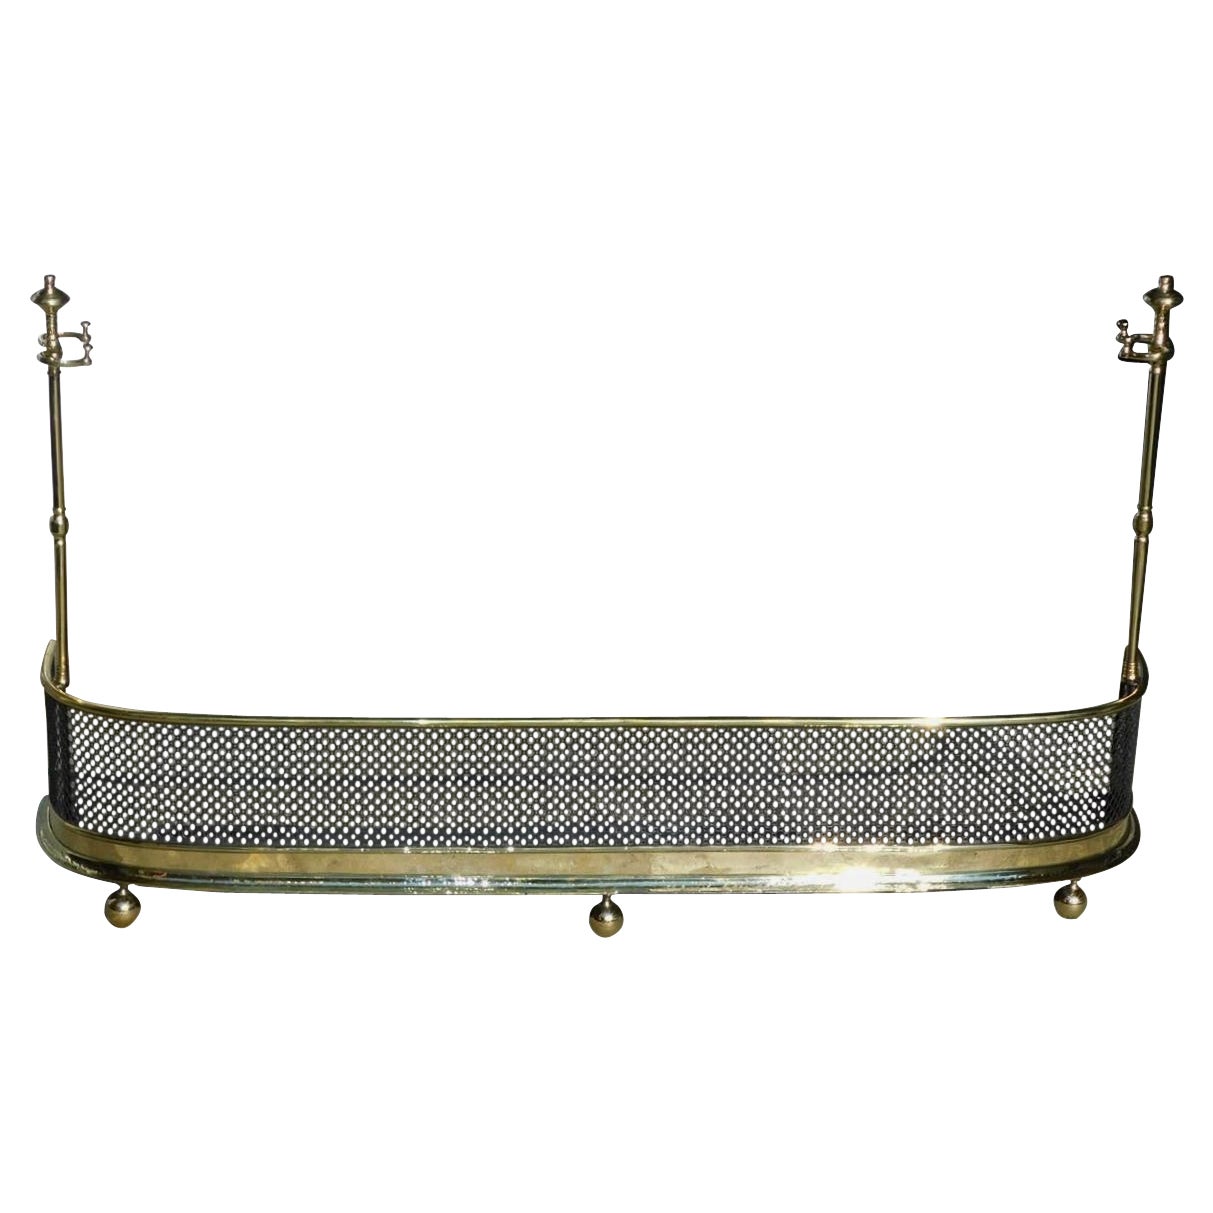 English Brass and Polished Steel Pierced Gallery Fire Place Fender, Circa 1810